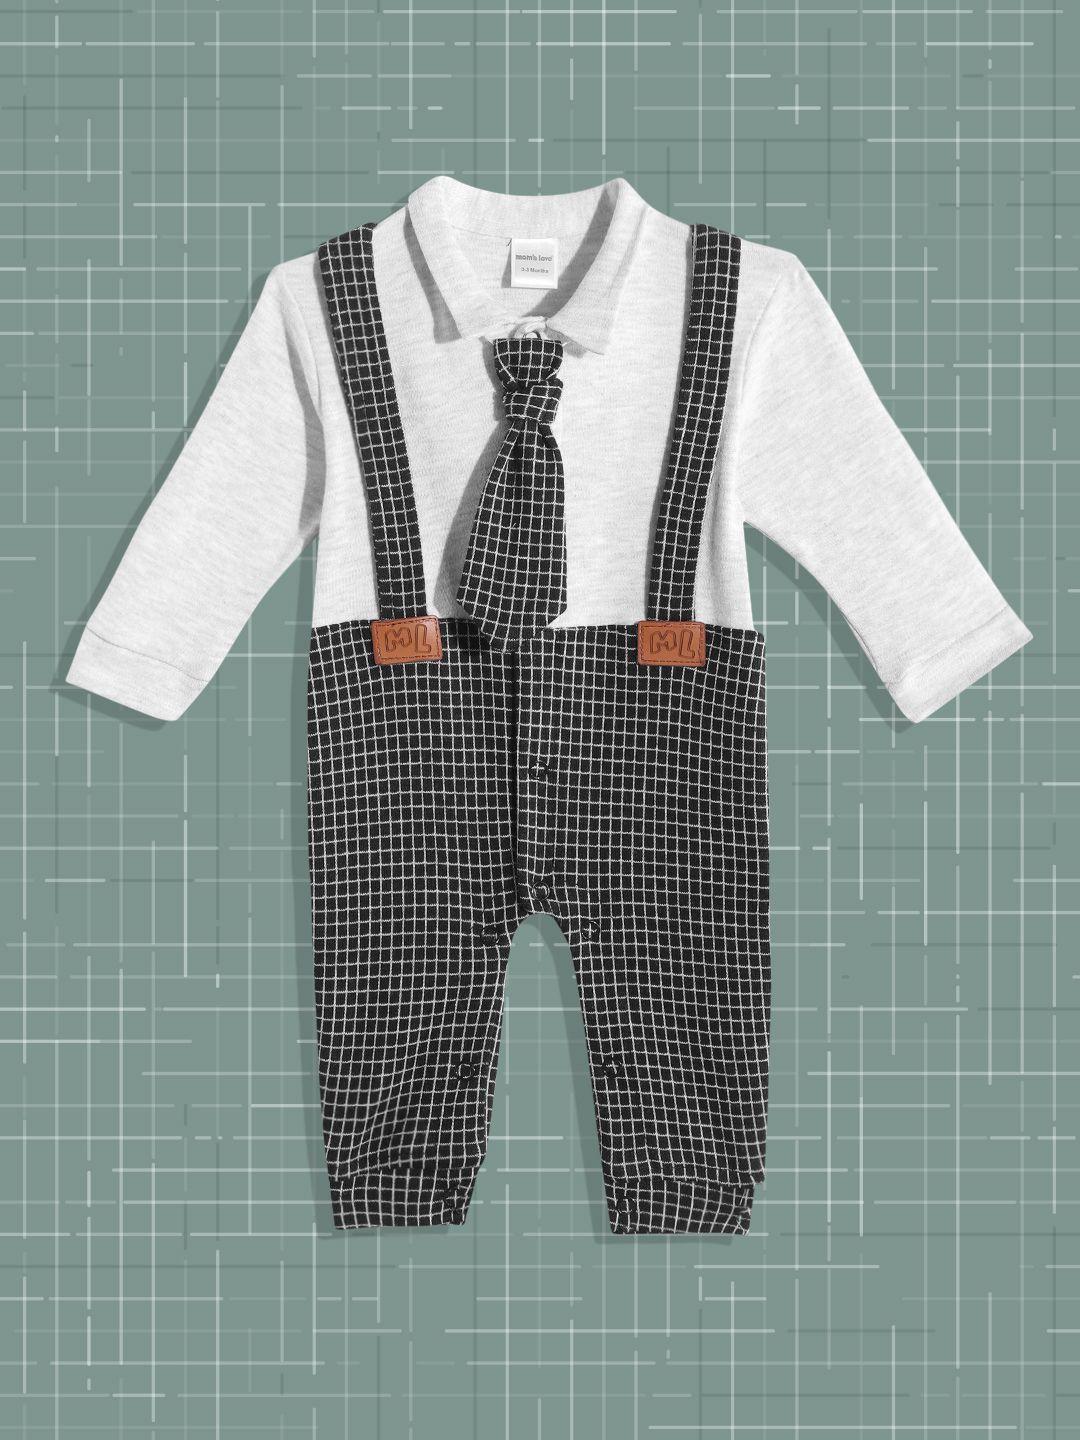 moms-love-infant-boys-grey-&-black-cotton-checked-rompers-with-attached-suspenders-&-tie